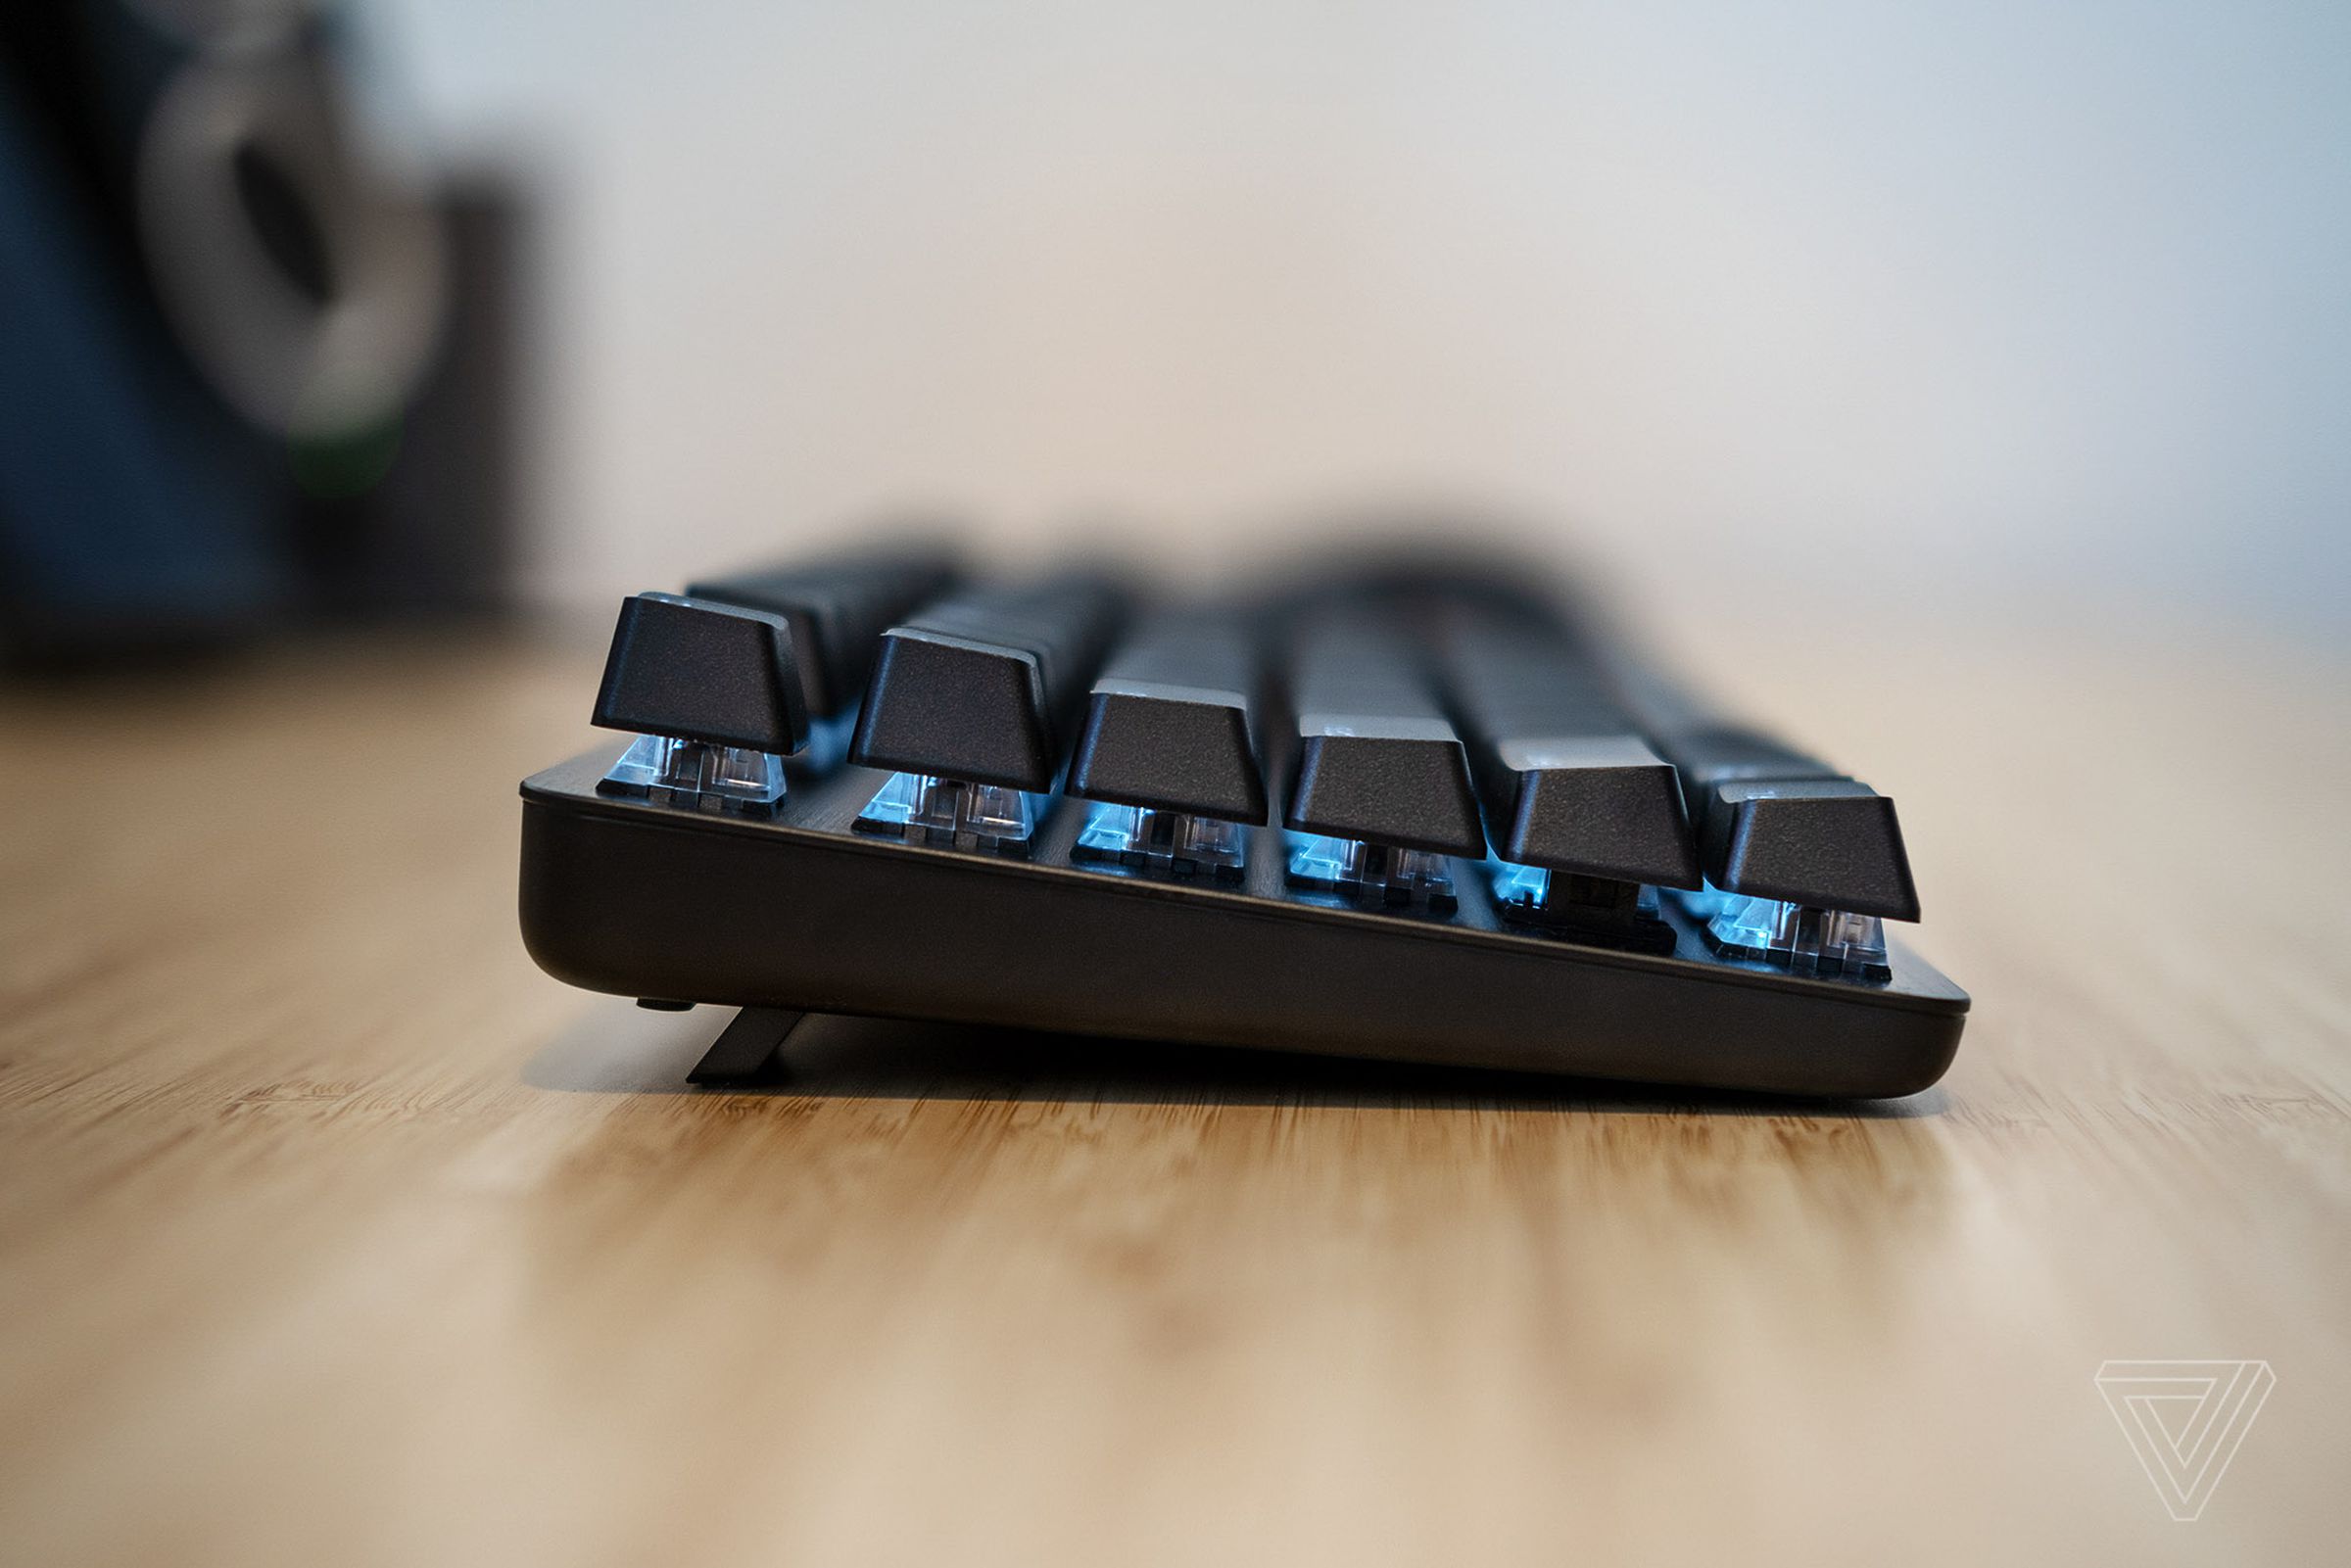 Plastic feet let you adjust the angle of the keyboard.